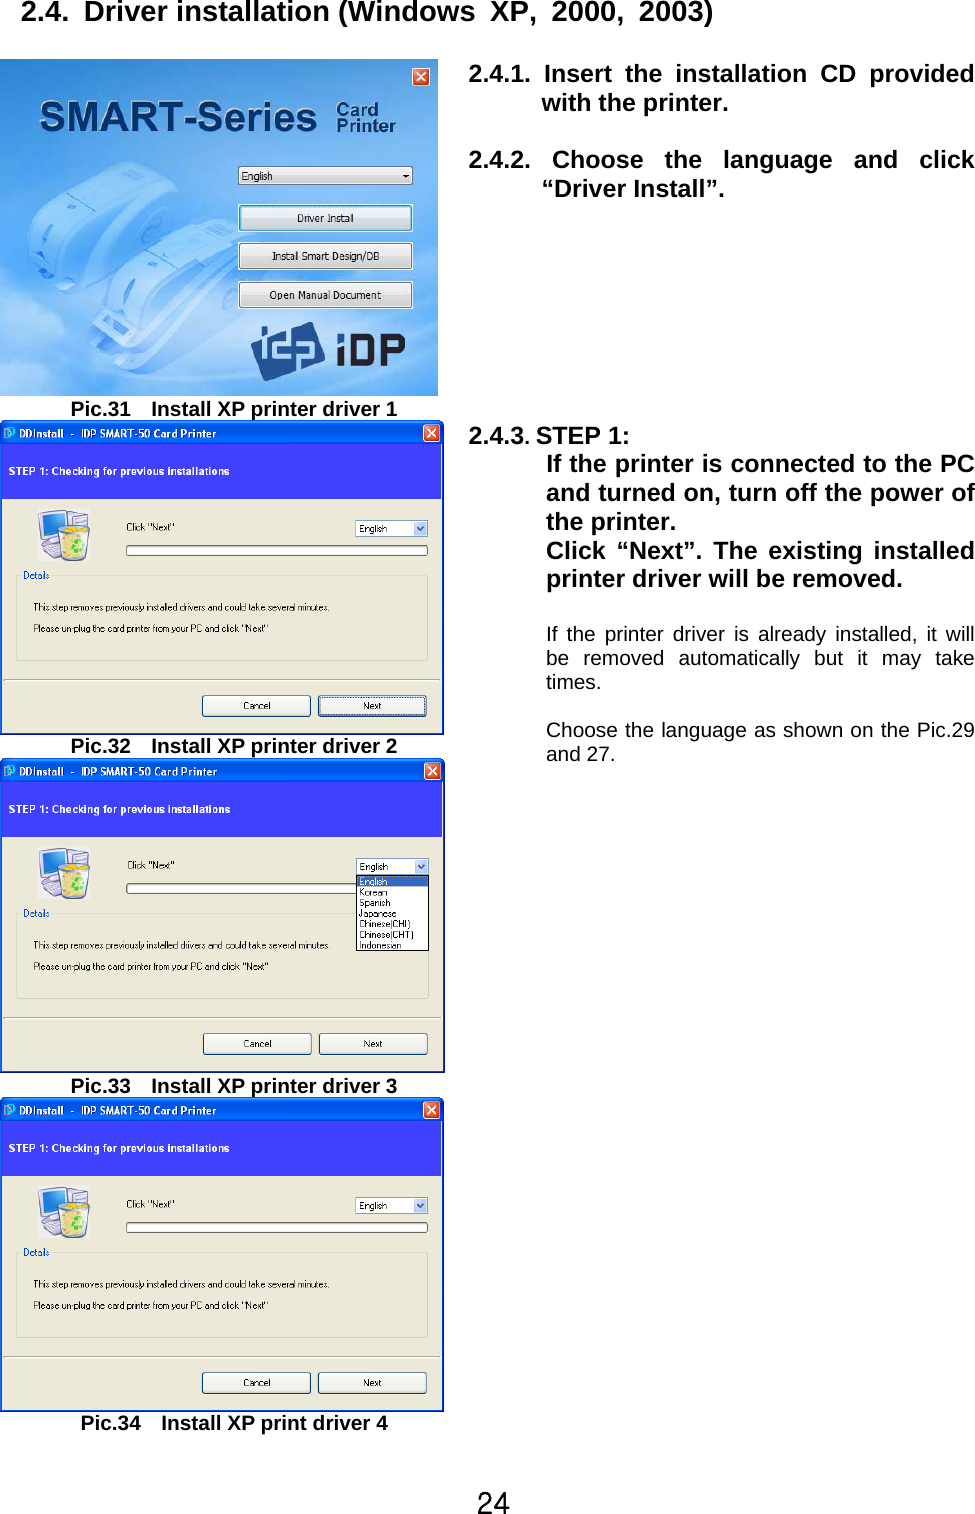 24  2.4. Driver installation (Windows XP, 2000, 2003)    Pic.31    Install XP printer driver 1 2.4.1. Insert the installation CD provided with the printer.  2.4.2. Choose the language and click “Driver Install”.  Pic.32    Install XP printer driver 2  Pic.33    Install XP printer driver 3 2.4.3. STEP 1:   If the printer is connected to the PC and turned on, turn off the power of the printer. Click “Next”. The existing installed printer driver will be removed.  If the printer driver is already installed, it will be removed automatically but it may take times.   Choose the language as shown on the Pic.29and 27.   Pic.34    Install XP print driver 4   